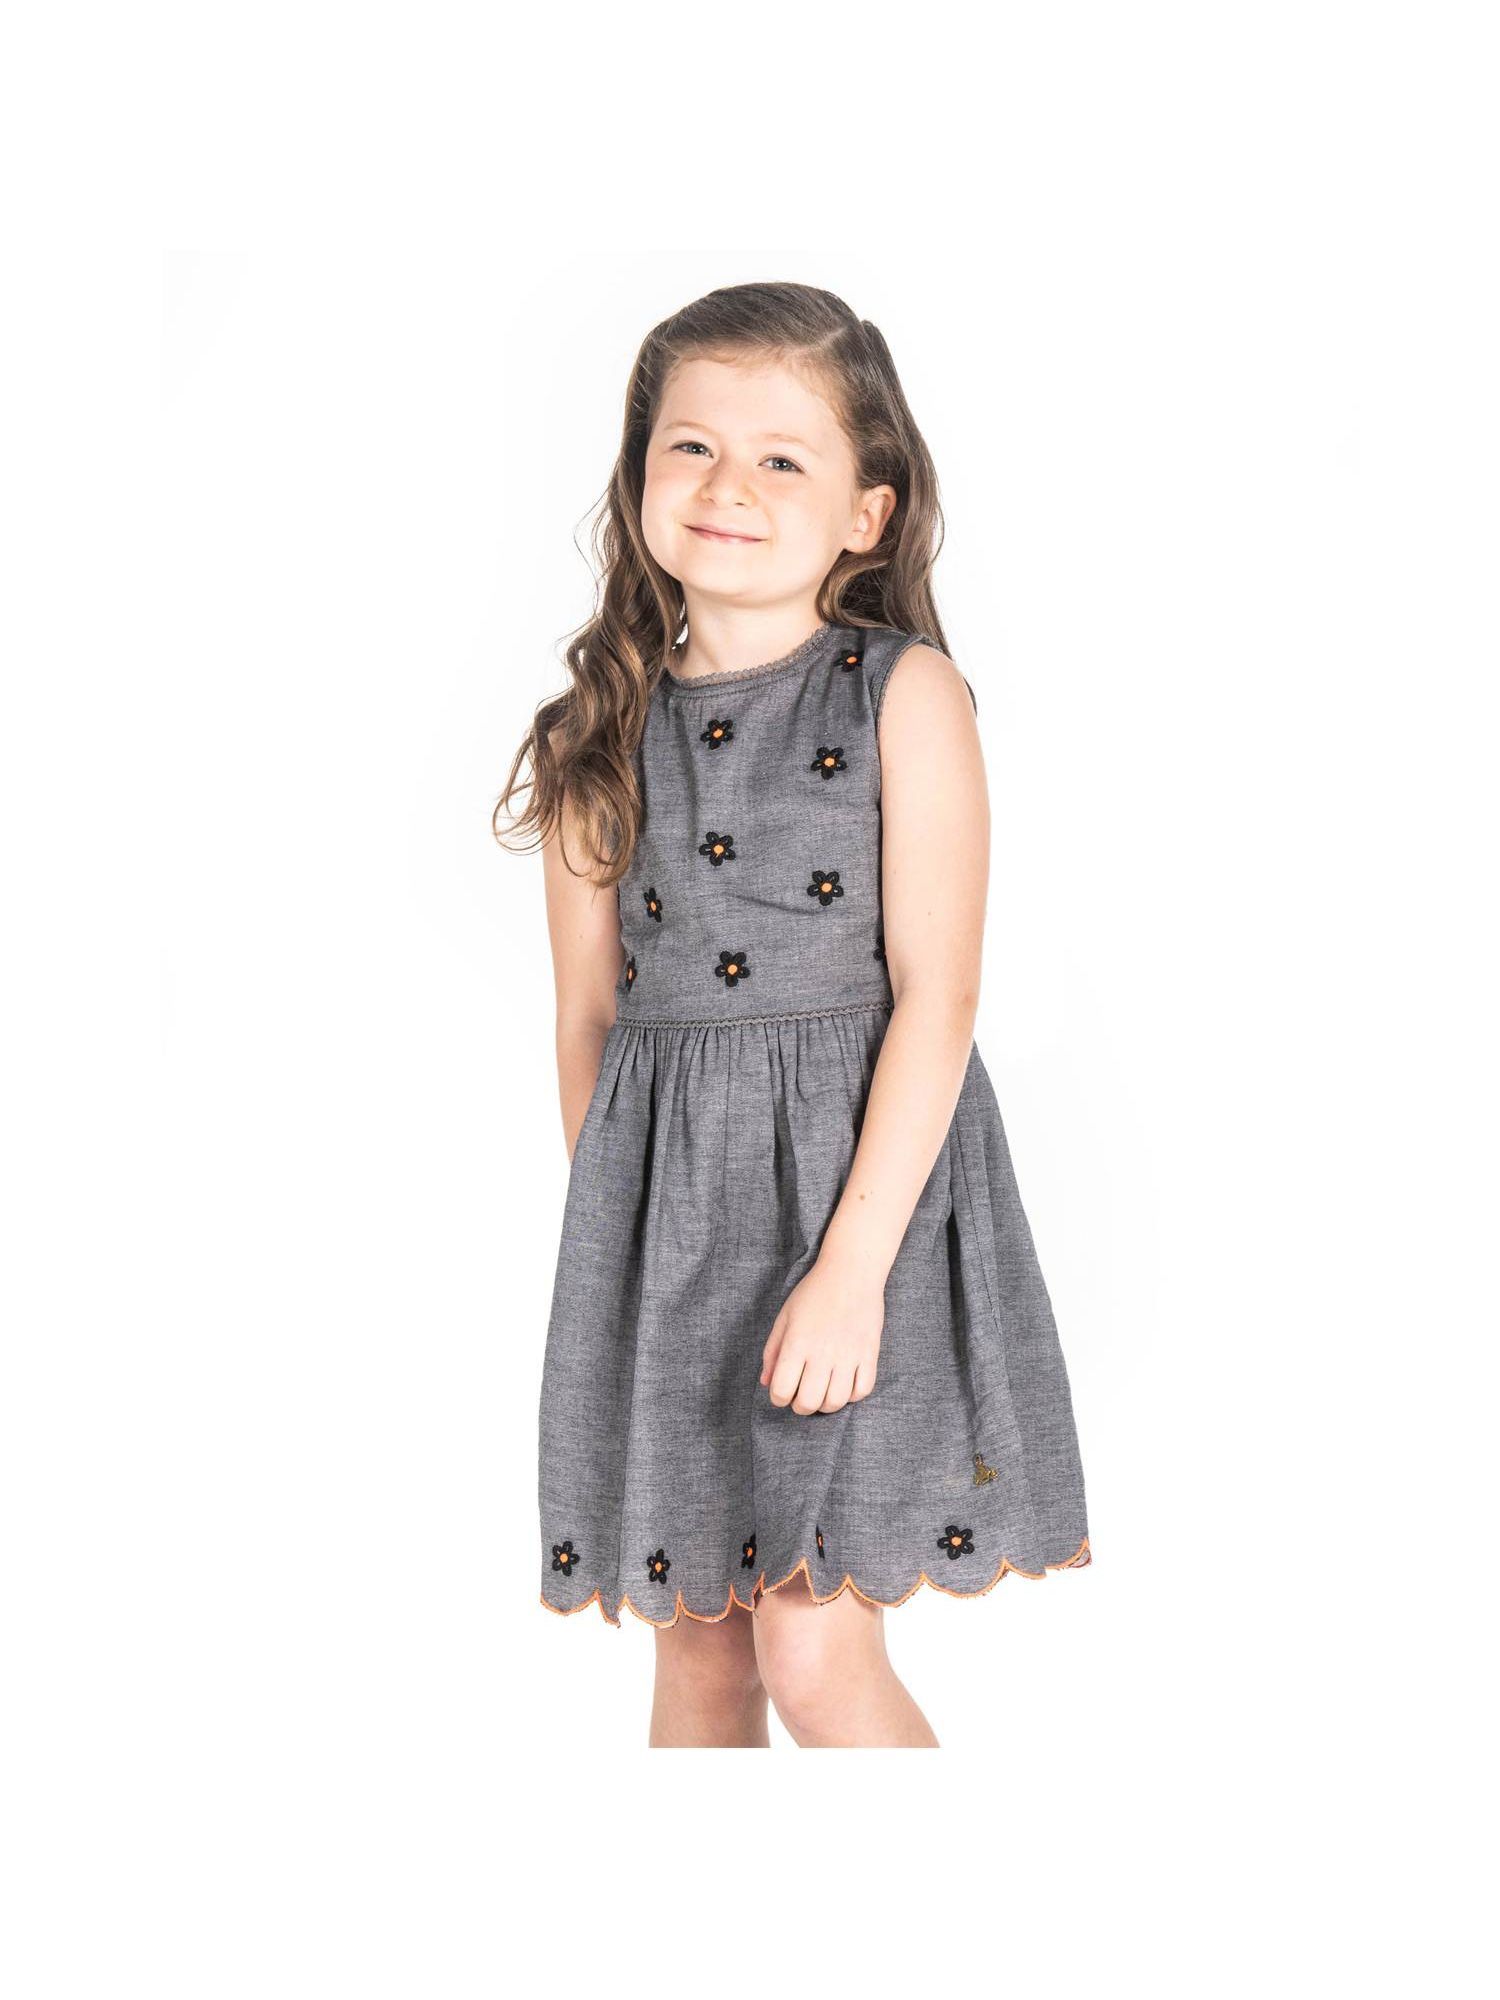 Stylish Dress for 11 Years Girl  15 Beautiful Collection